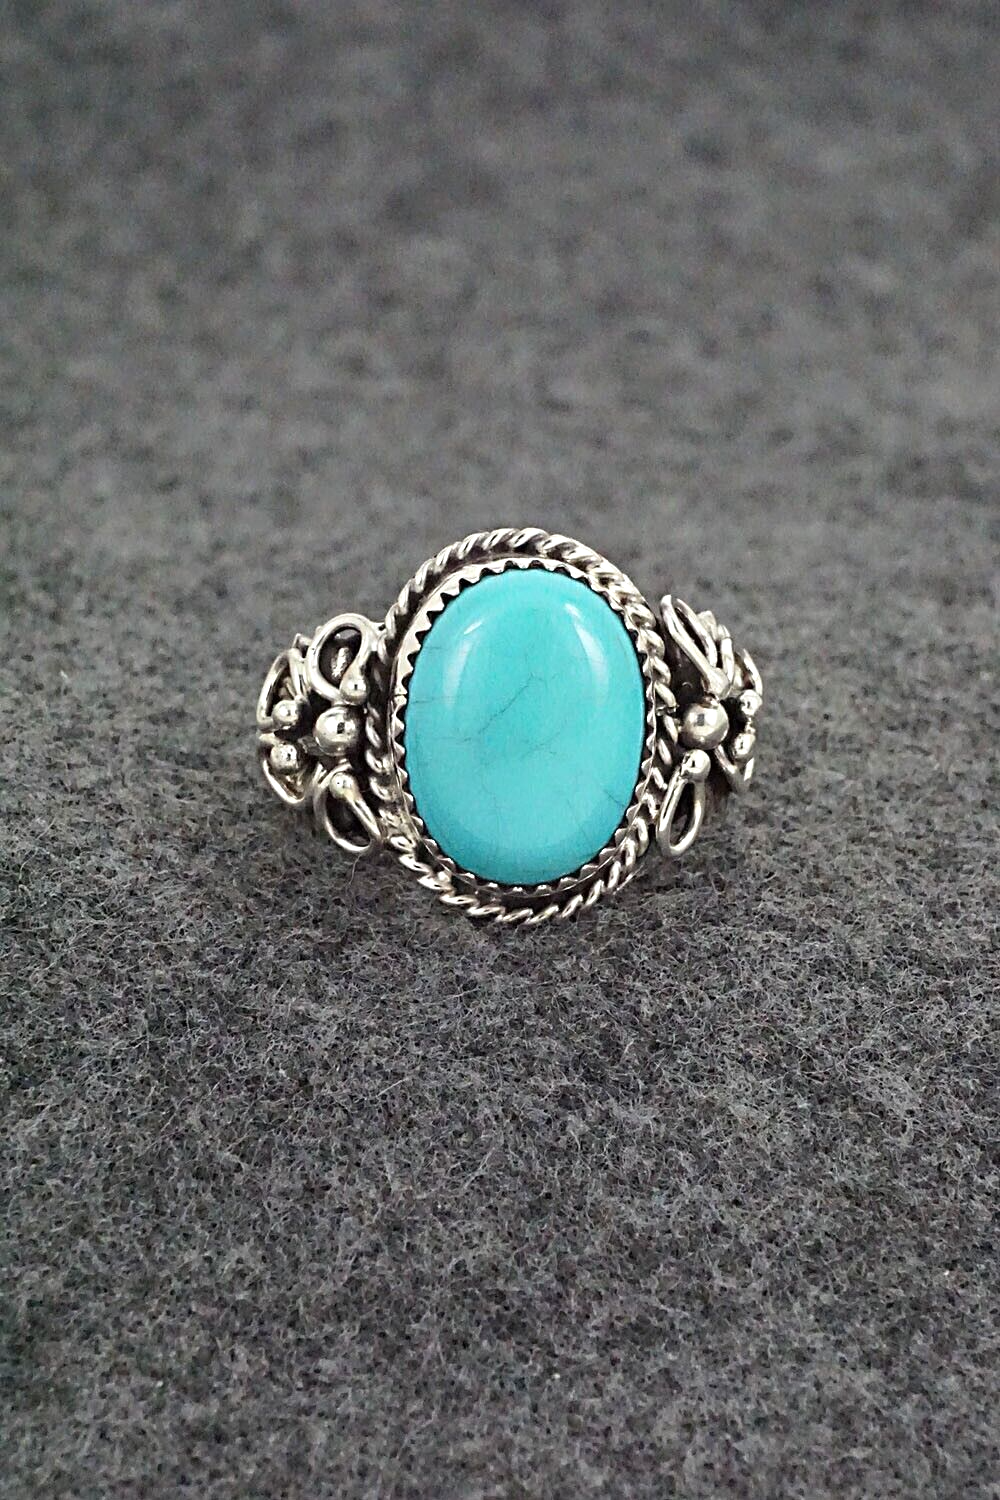 Turquoise & Sterling Silver Ring - Jeannette Saunders - Size 9.5